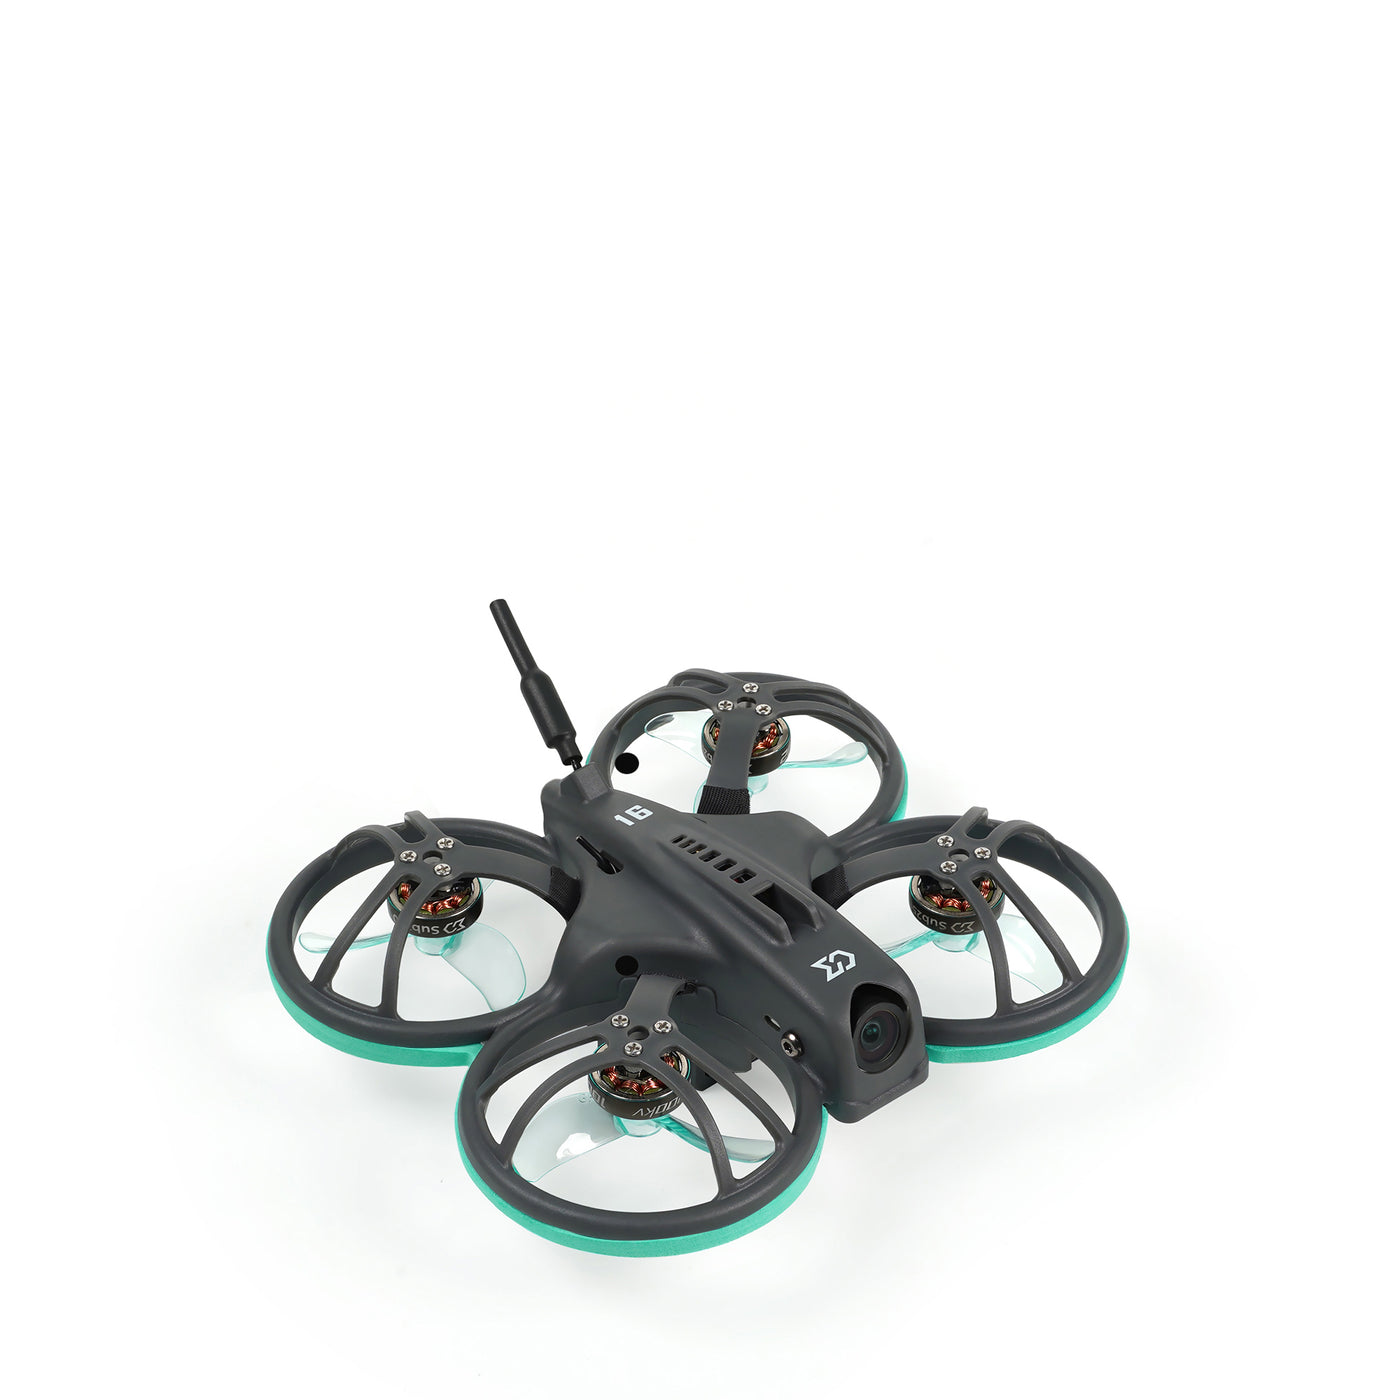 Whoopfly16 Analog drone